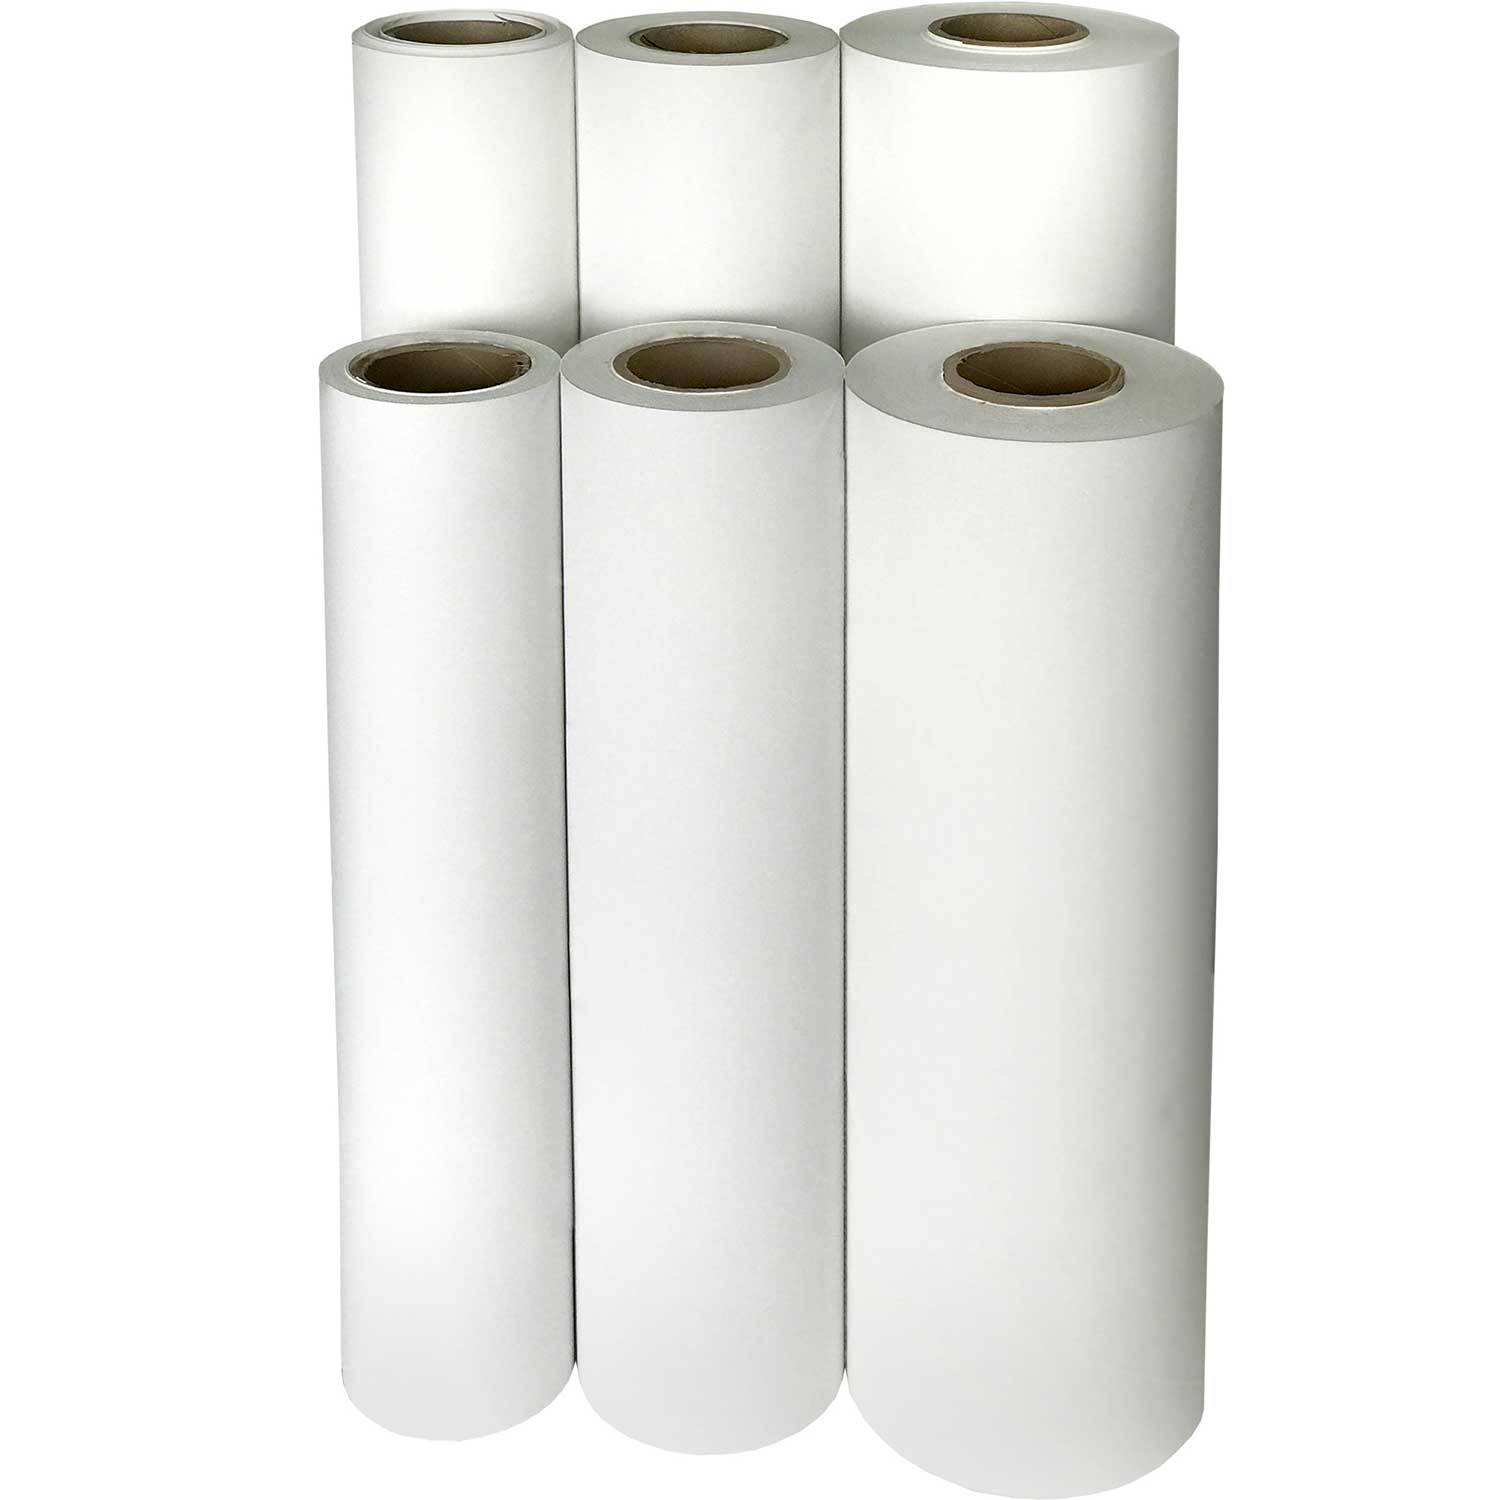 Plain Matt White Wrapping Paper Roll 10m Roll By The Wedding of my